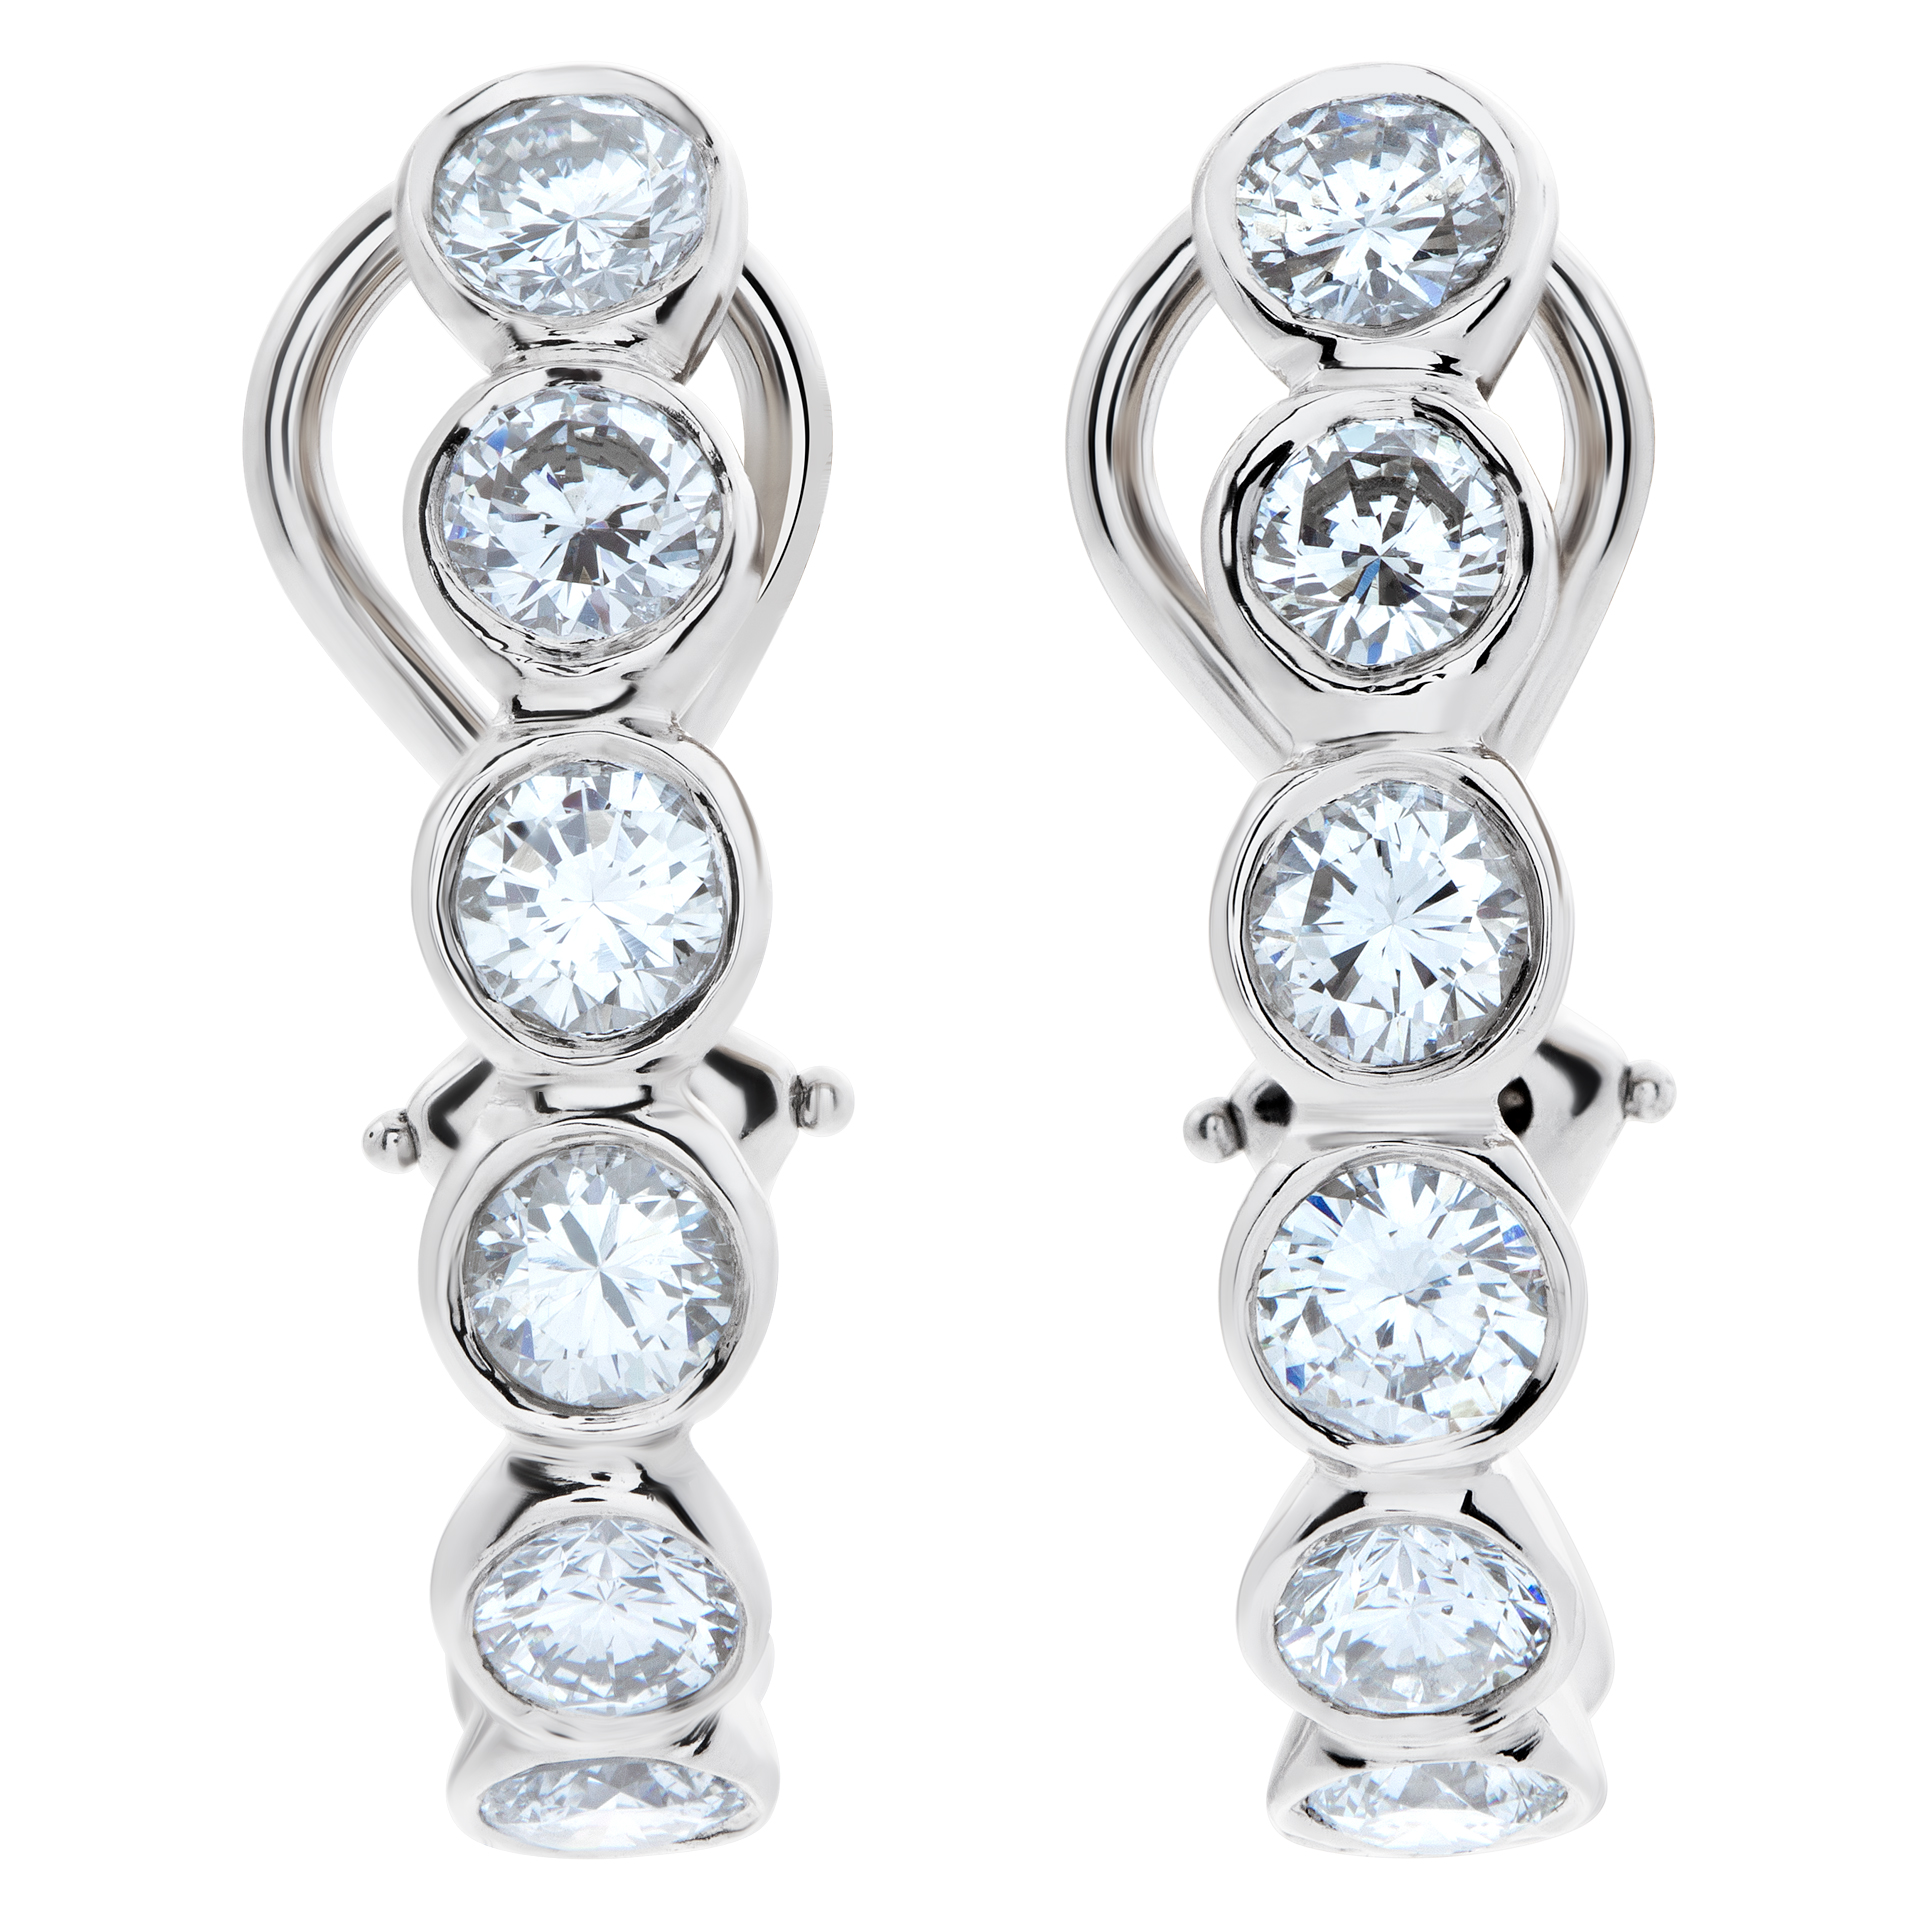 Platinum semi-hoop earrings with 3.75 carats in round diamonds